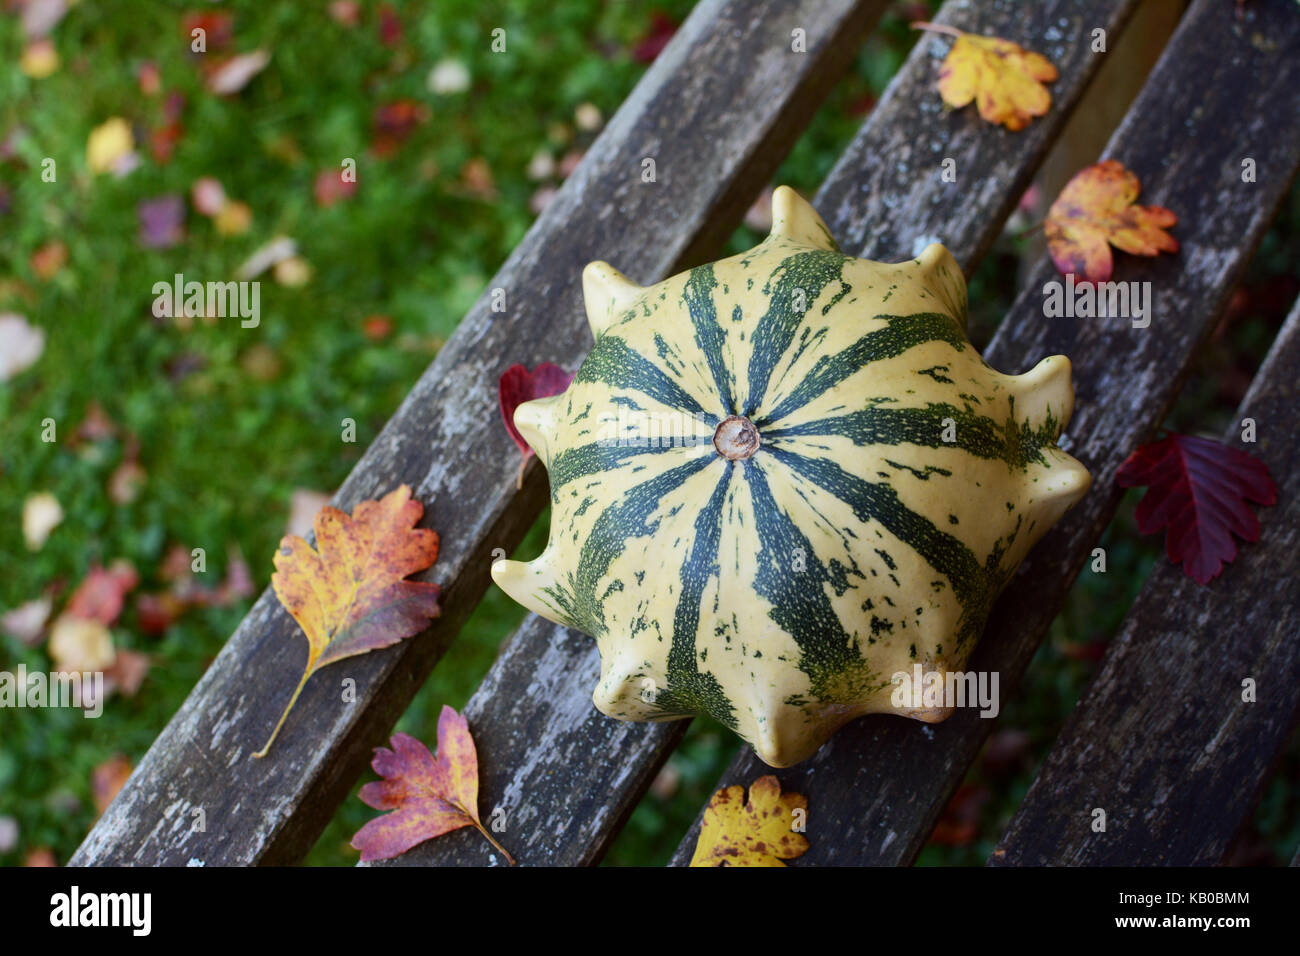 Striped Crown of Thorns ornamental gourd among fall leaves on a rustic wooden garden bench with copy space Stock Photo